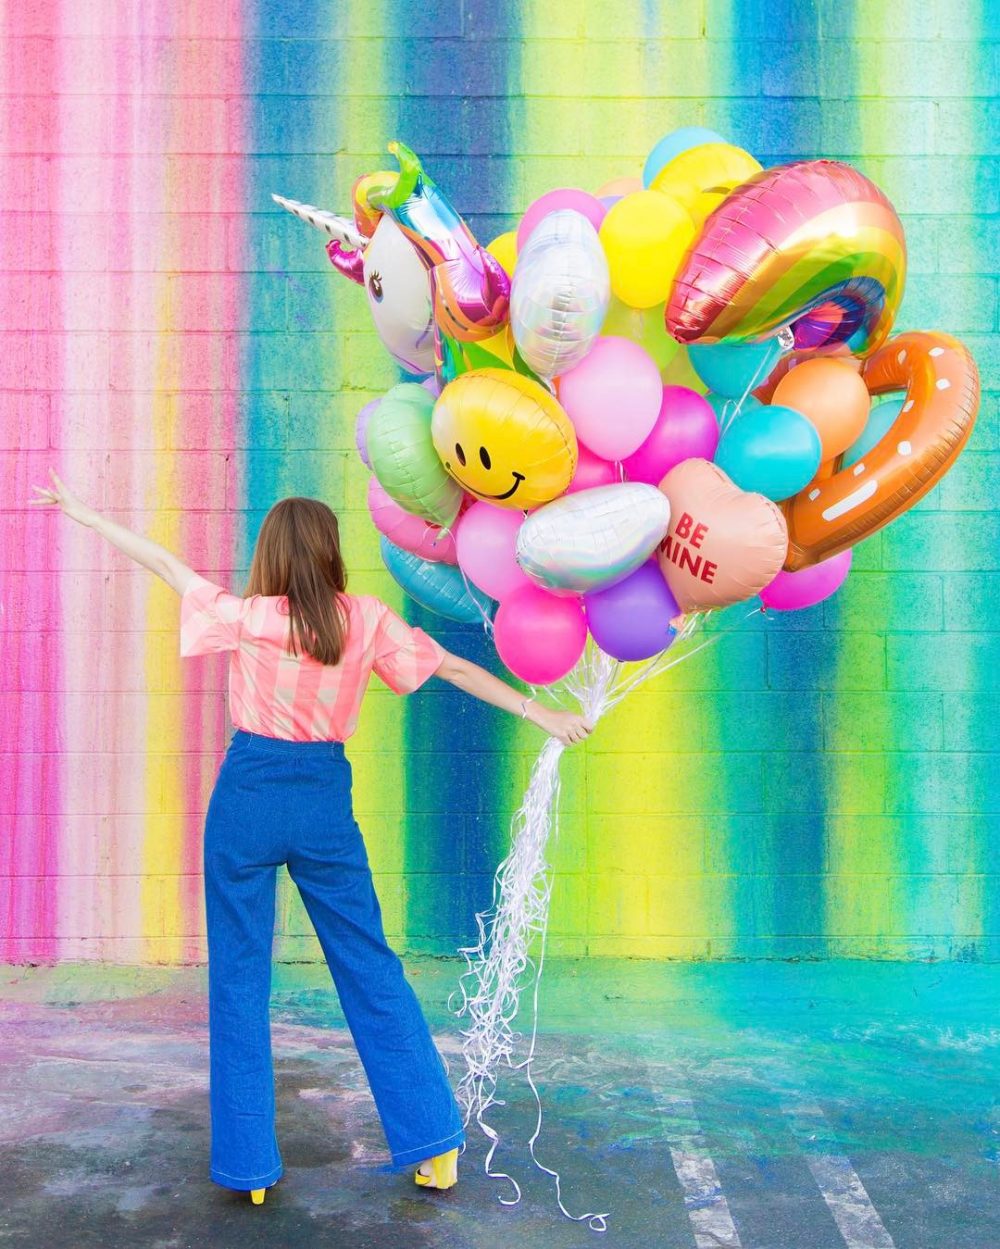 25 Images That Will Make You Excited for Brighter Days